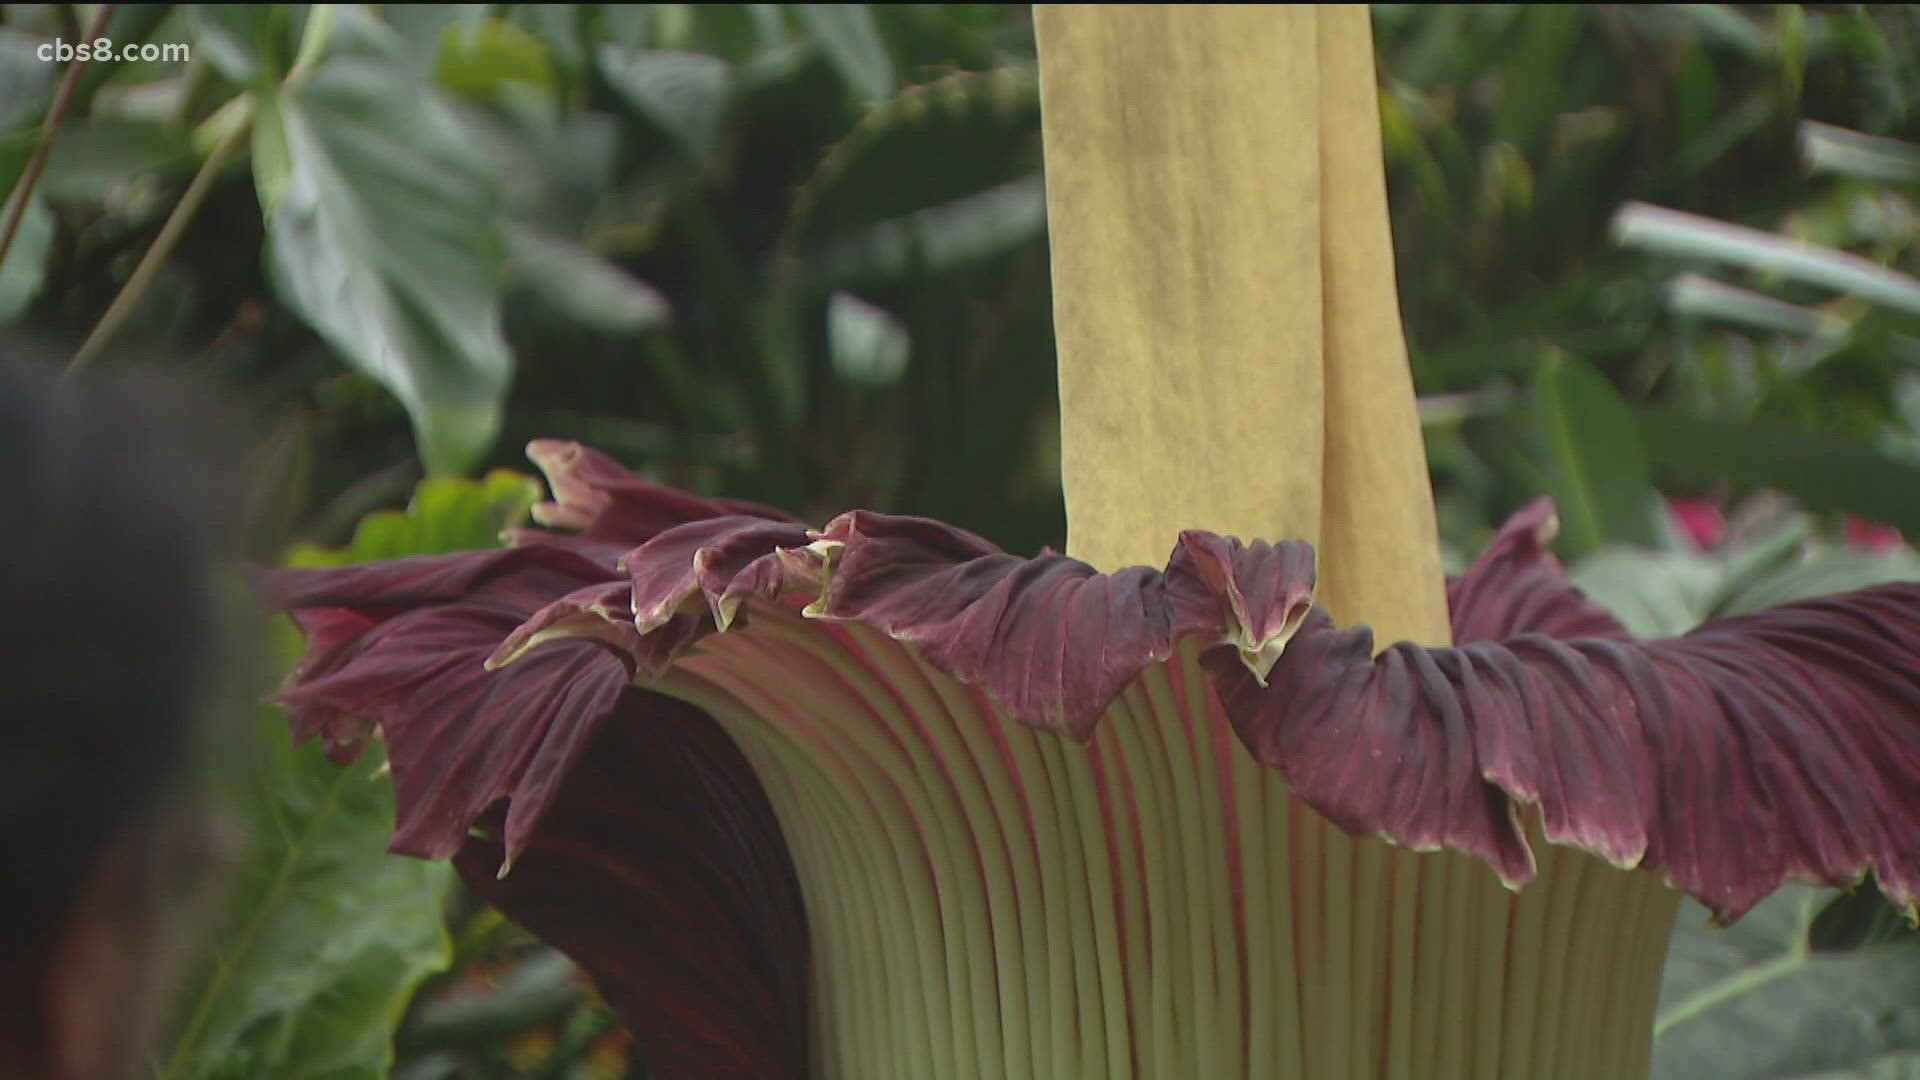 Amorphophallus titanum is the fastest growing plant in the world and its blooms bring thousands of onlookers who describe the smell in various ways.